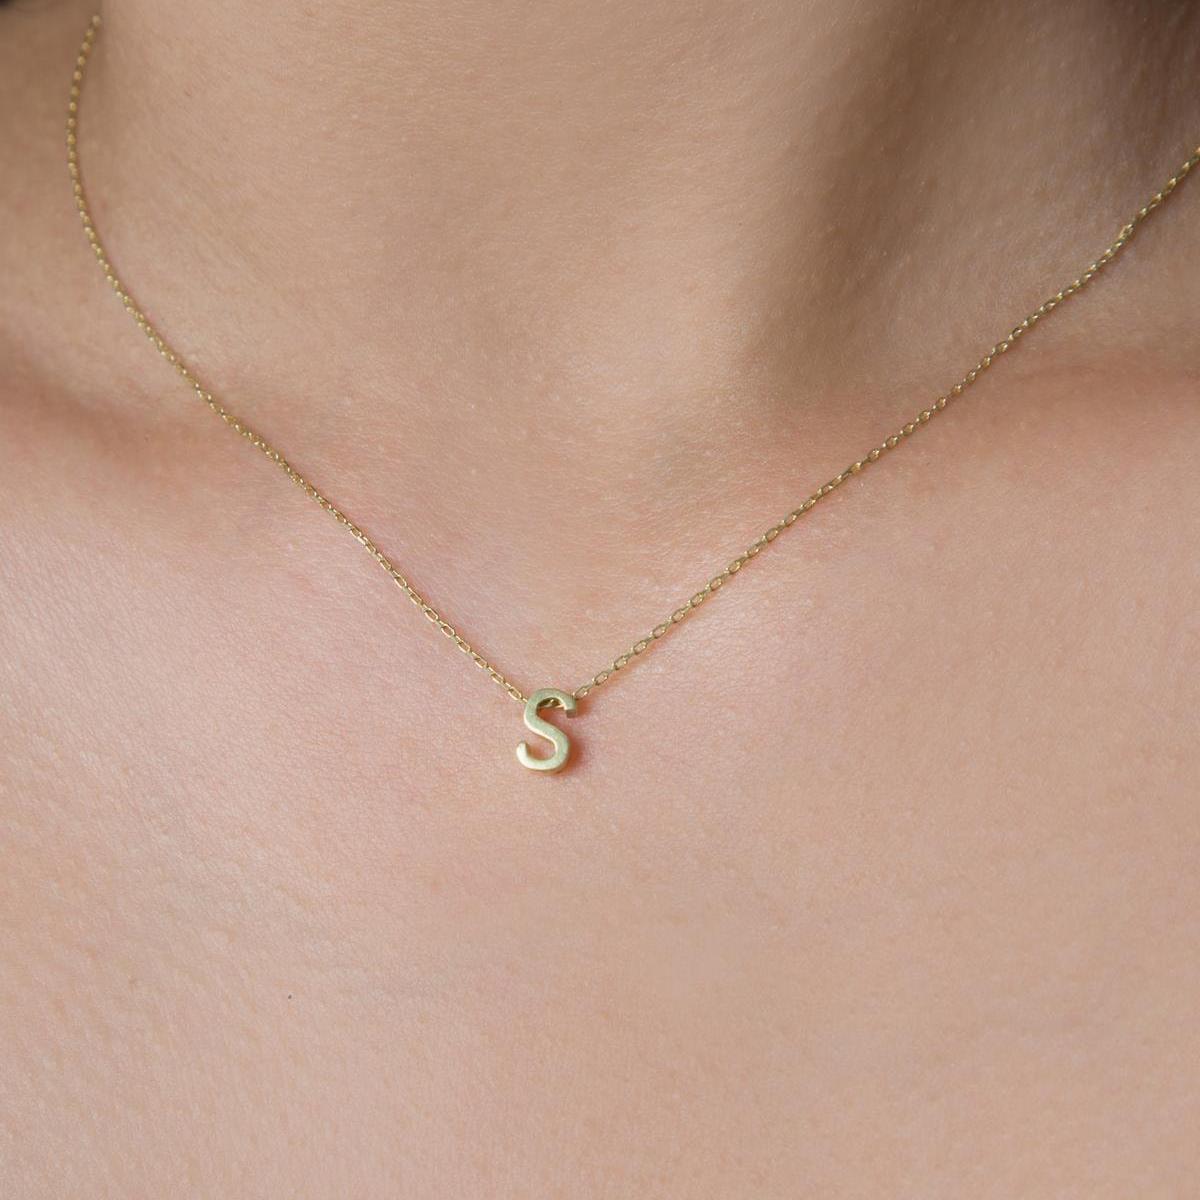 S Initial Necklace Gold • 14K Gold Initial Necklace • Gift For Her - Trending Silver Gifts